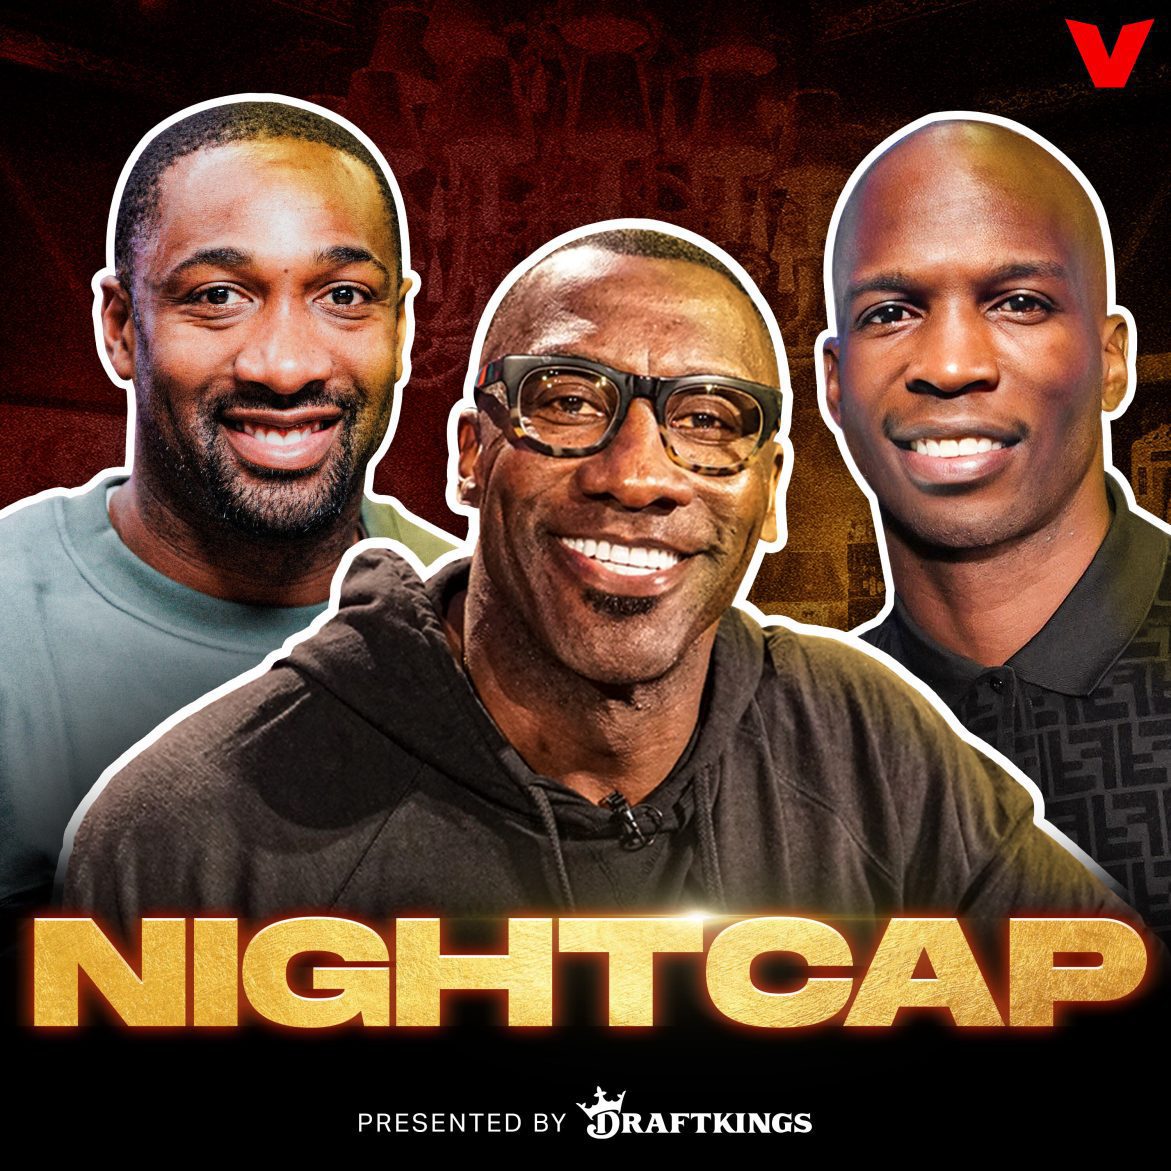 Black Podcasting - Nightcap - Hour 1: Russell Wilson to Pittsburgh, Oppenheimer at the Oscars, Baker's new deal